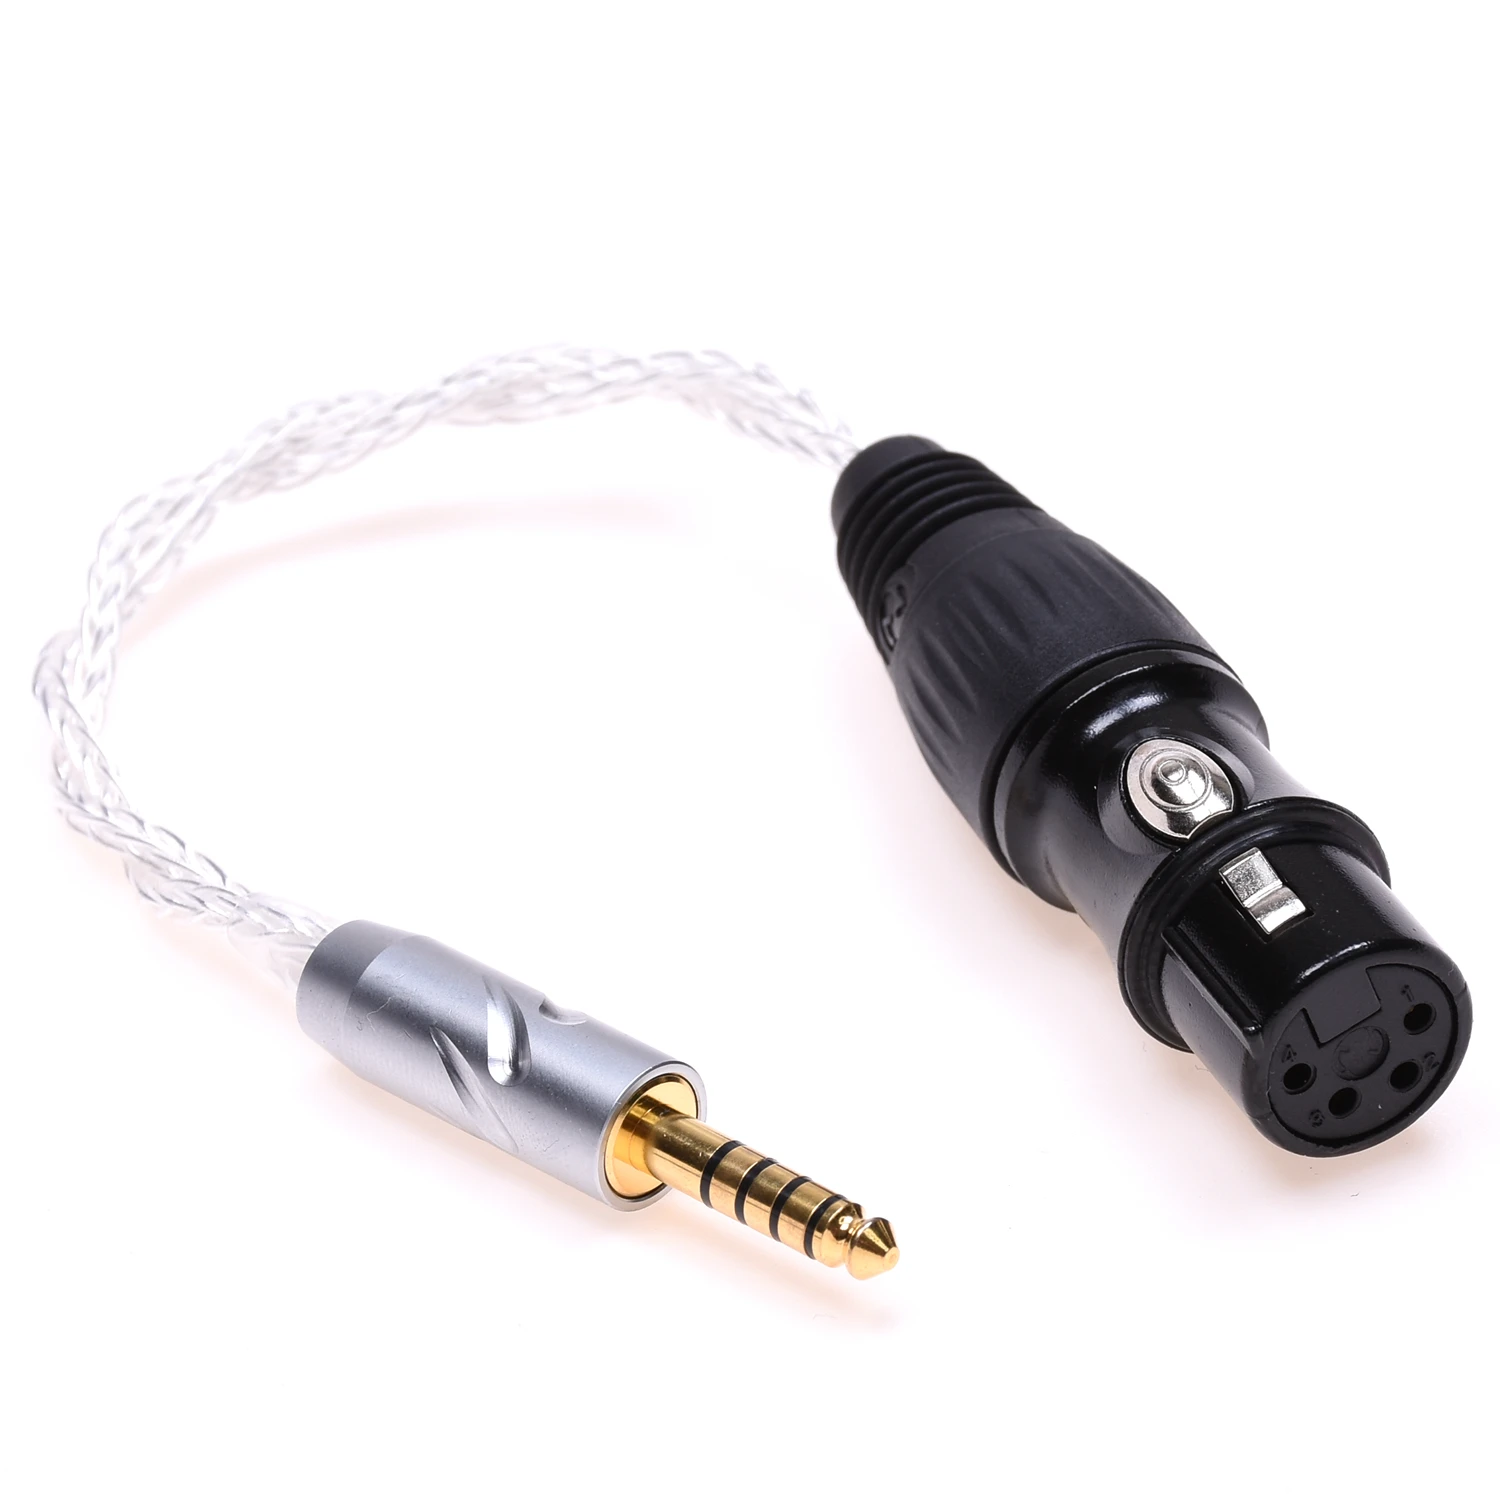 

16 Cores Silver Plated Cable 4.4mm Male to 4 Pin XLR Female Balanced Audio Adapter for Sony NW-WM1Z 1A MDR-Z1R TA-ZH1ES PHA-2